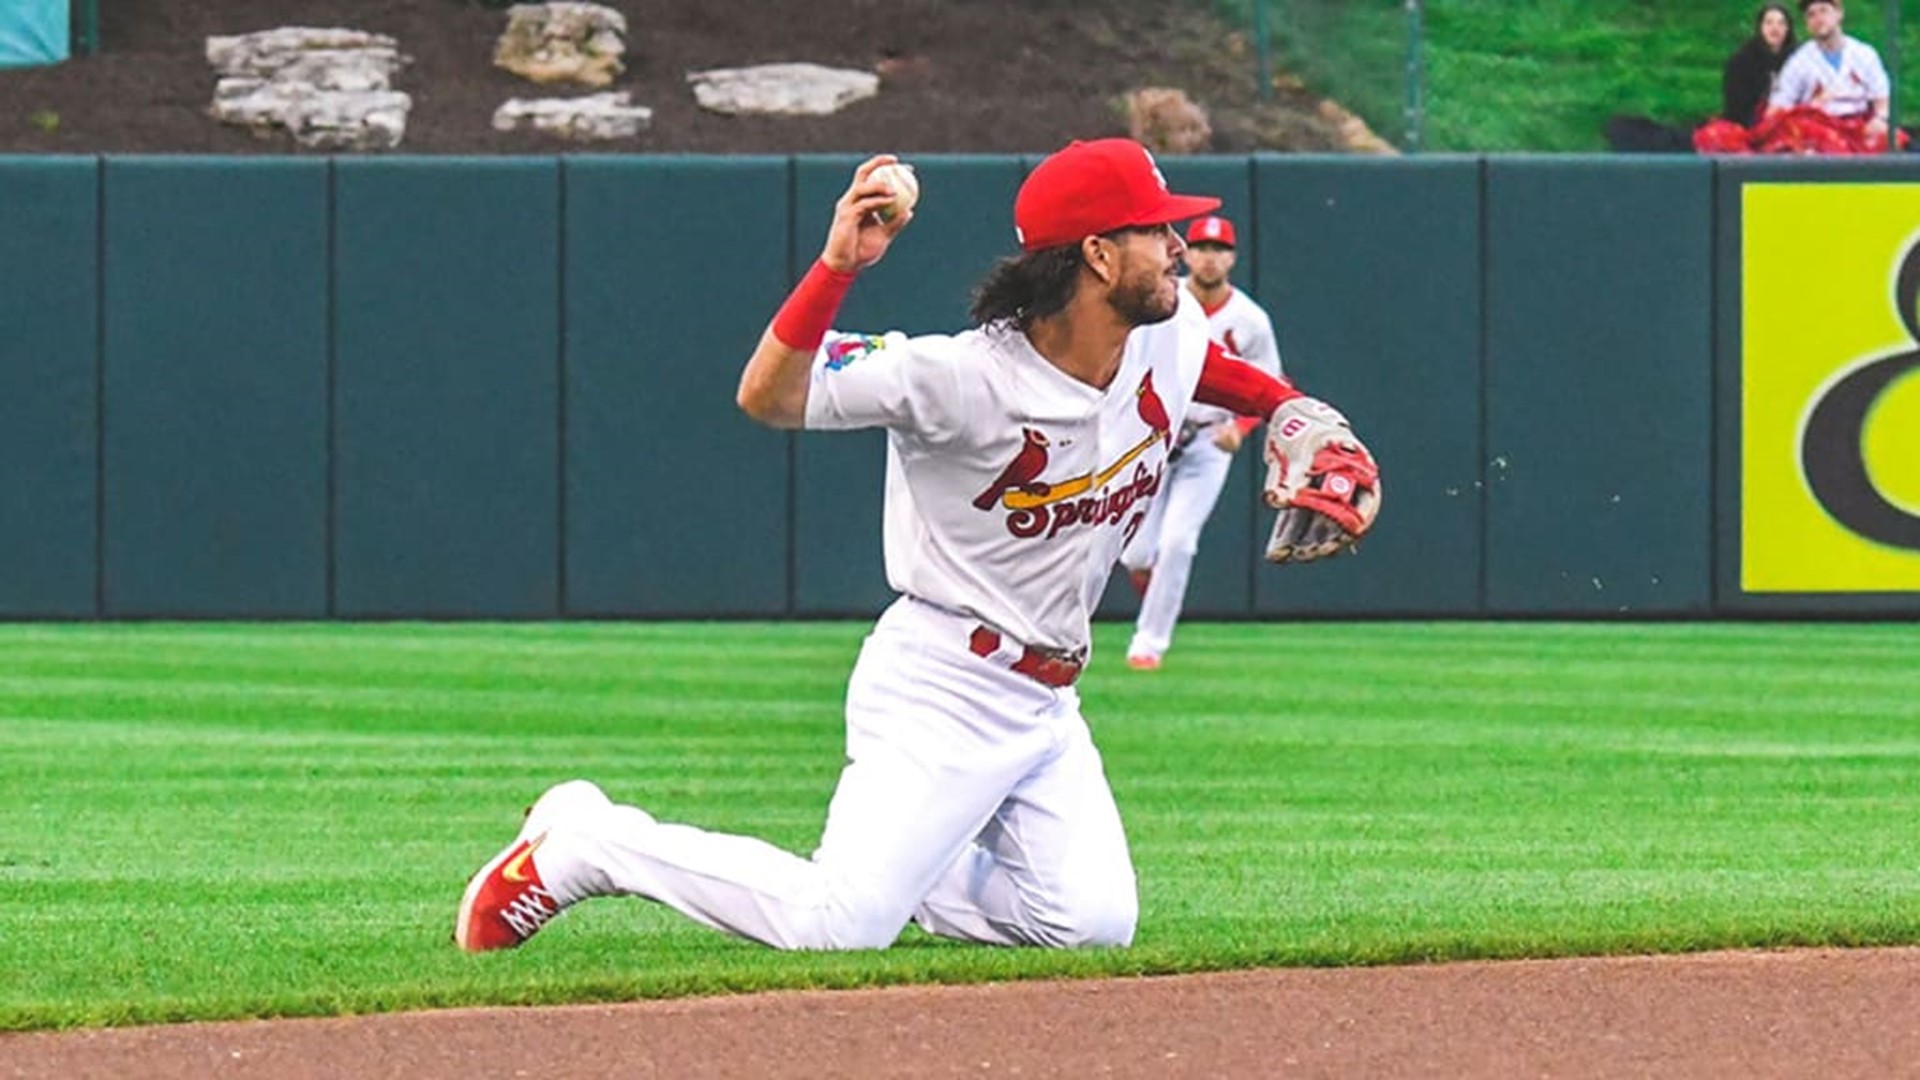 Here's a forecast of the St. Louis Cardinals 2020 MLB roster